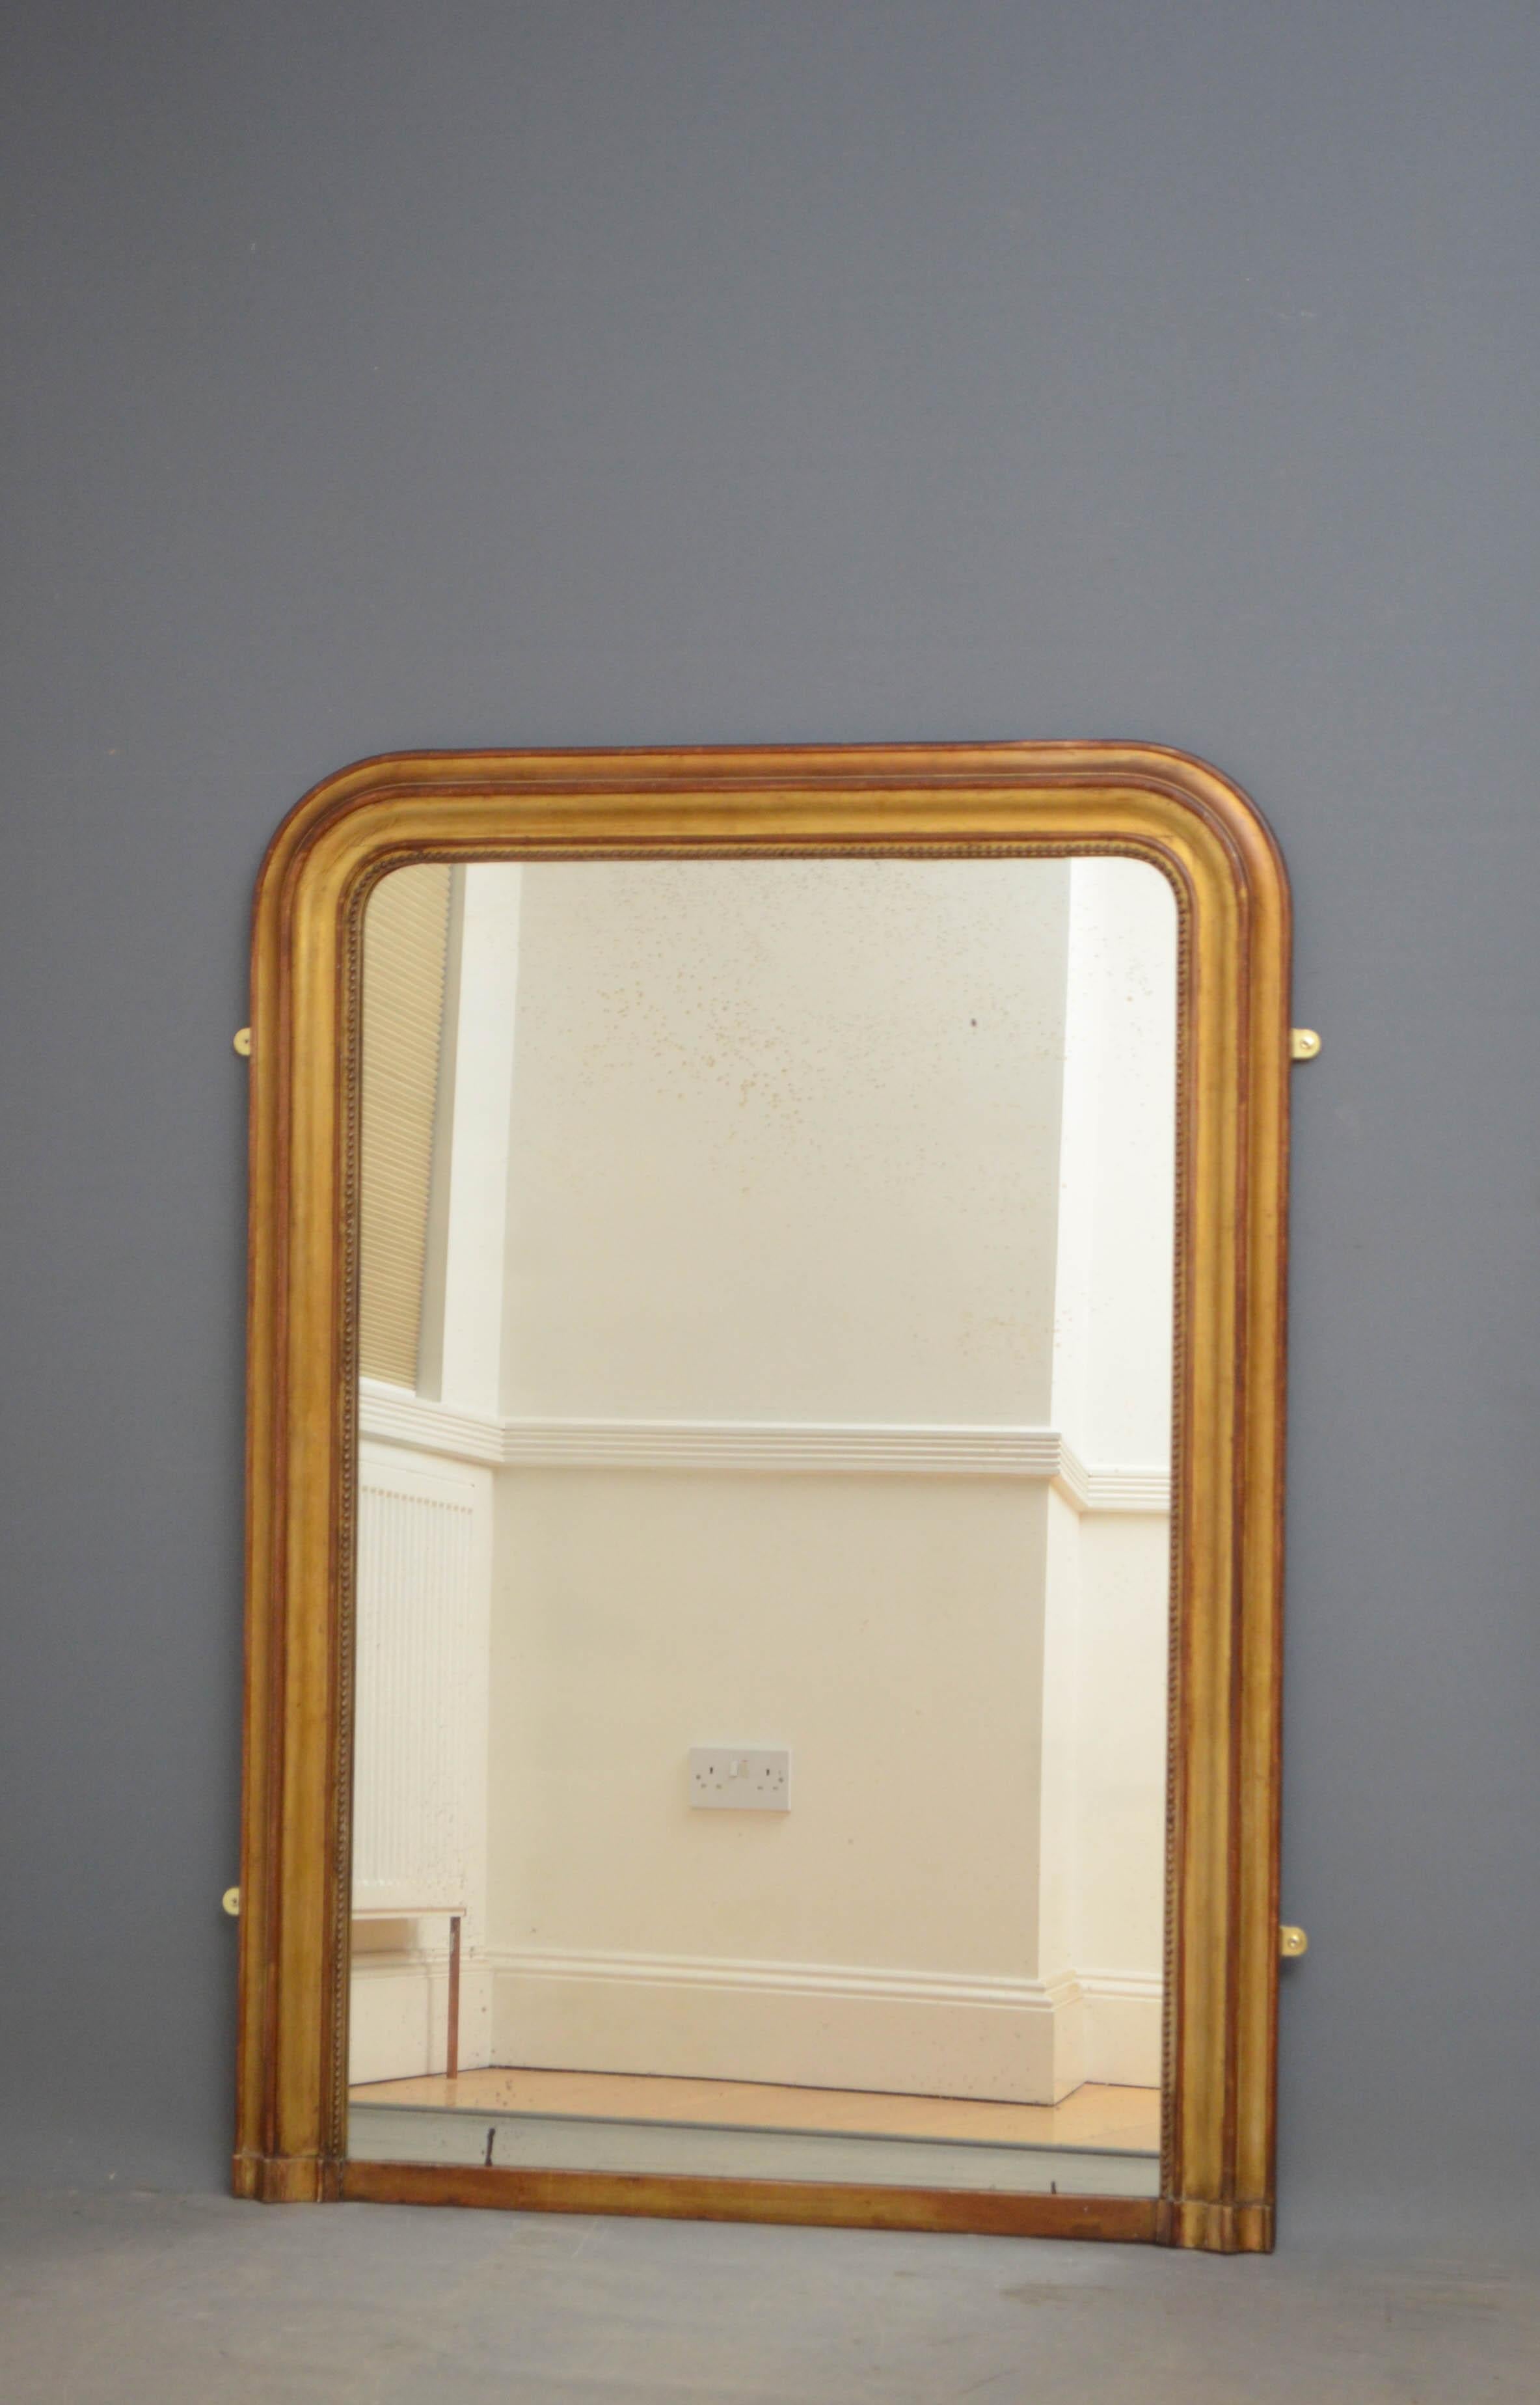 Sn4866 simple French 19th century wall mirror, having original foxed glass in moulded gilded frame with beaded decoration. This antique overmantel mirror retains its original glass, gilt and extensive patina, all in wonderful home ready condition,